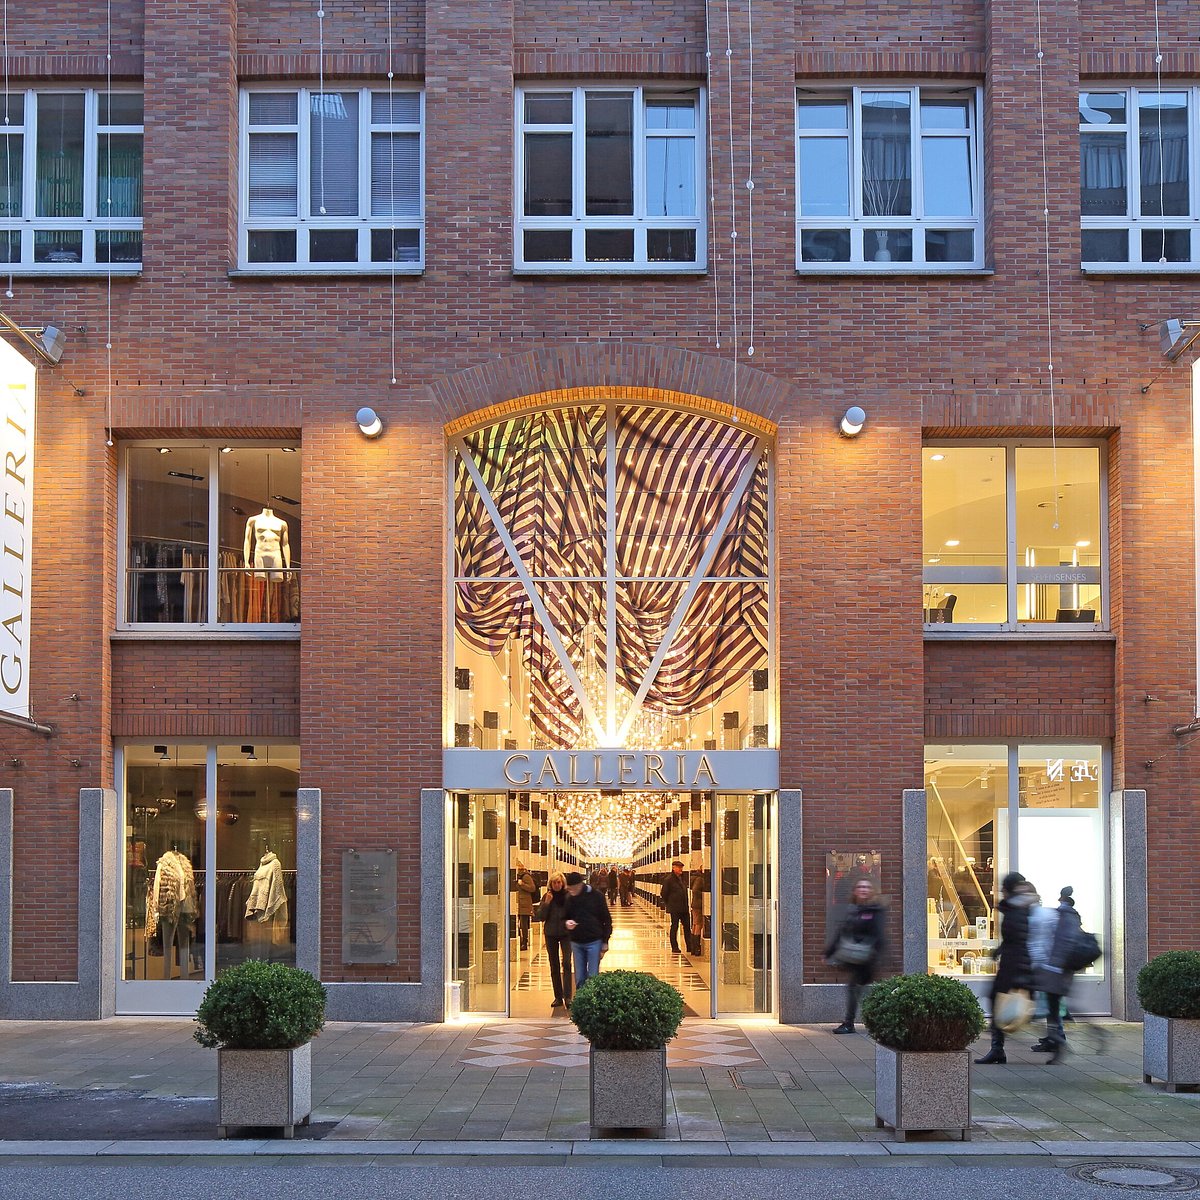 The Stores: Discover how Louis Vuitton plays the game at Alsterhaus